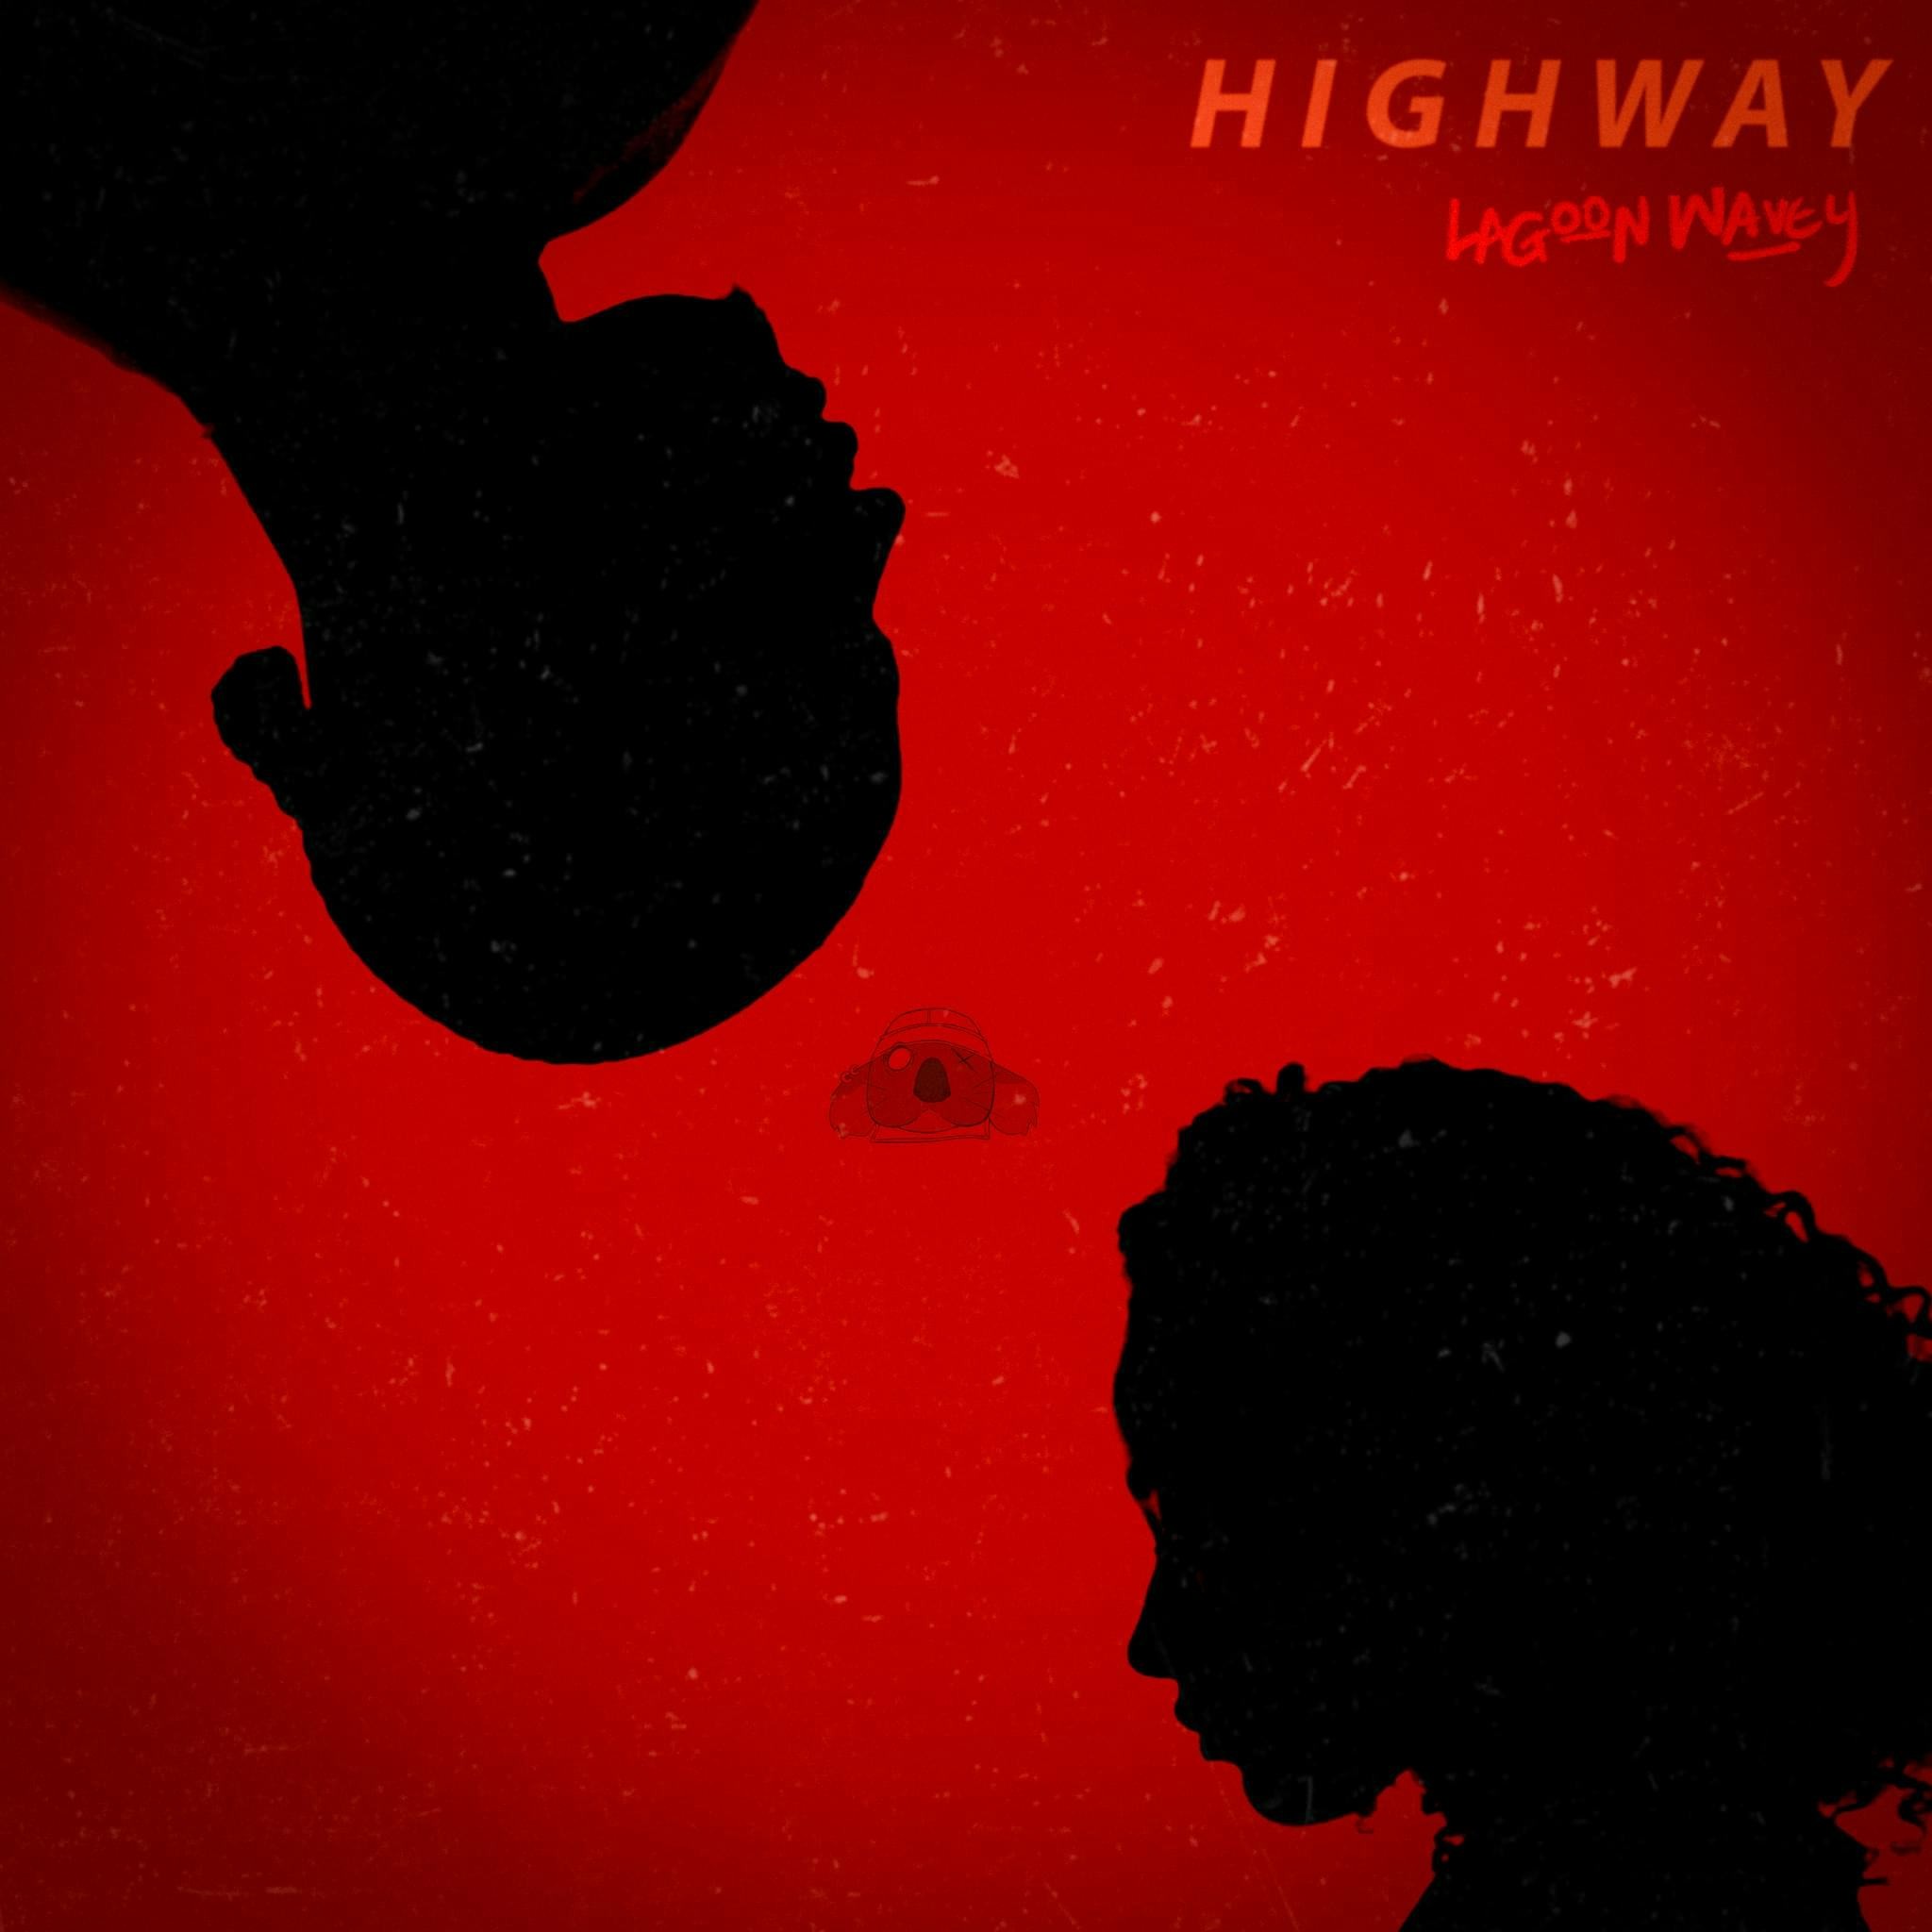 Cover art for Highway by Lagoon Wavey